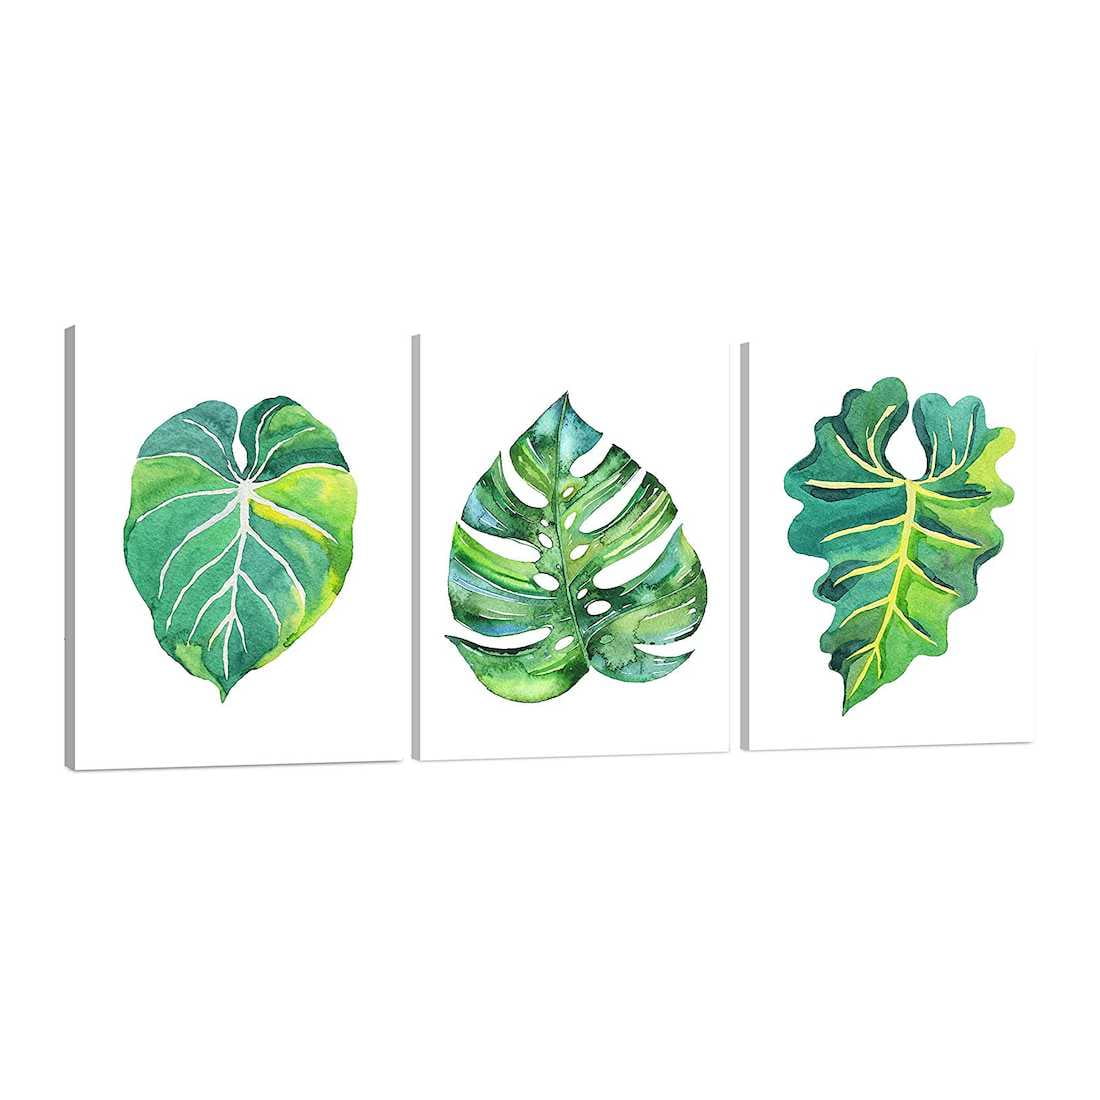 ZingArts 3 Panel Canvas Wall Art Green Plant Plantain Leaf Simple Life Watercolor Style Nature Pictures Print On Canvas for Living Room Kitchen Decorations Stretched Framed Ready to Hang 12x12x3pcs 